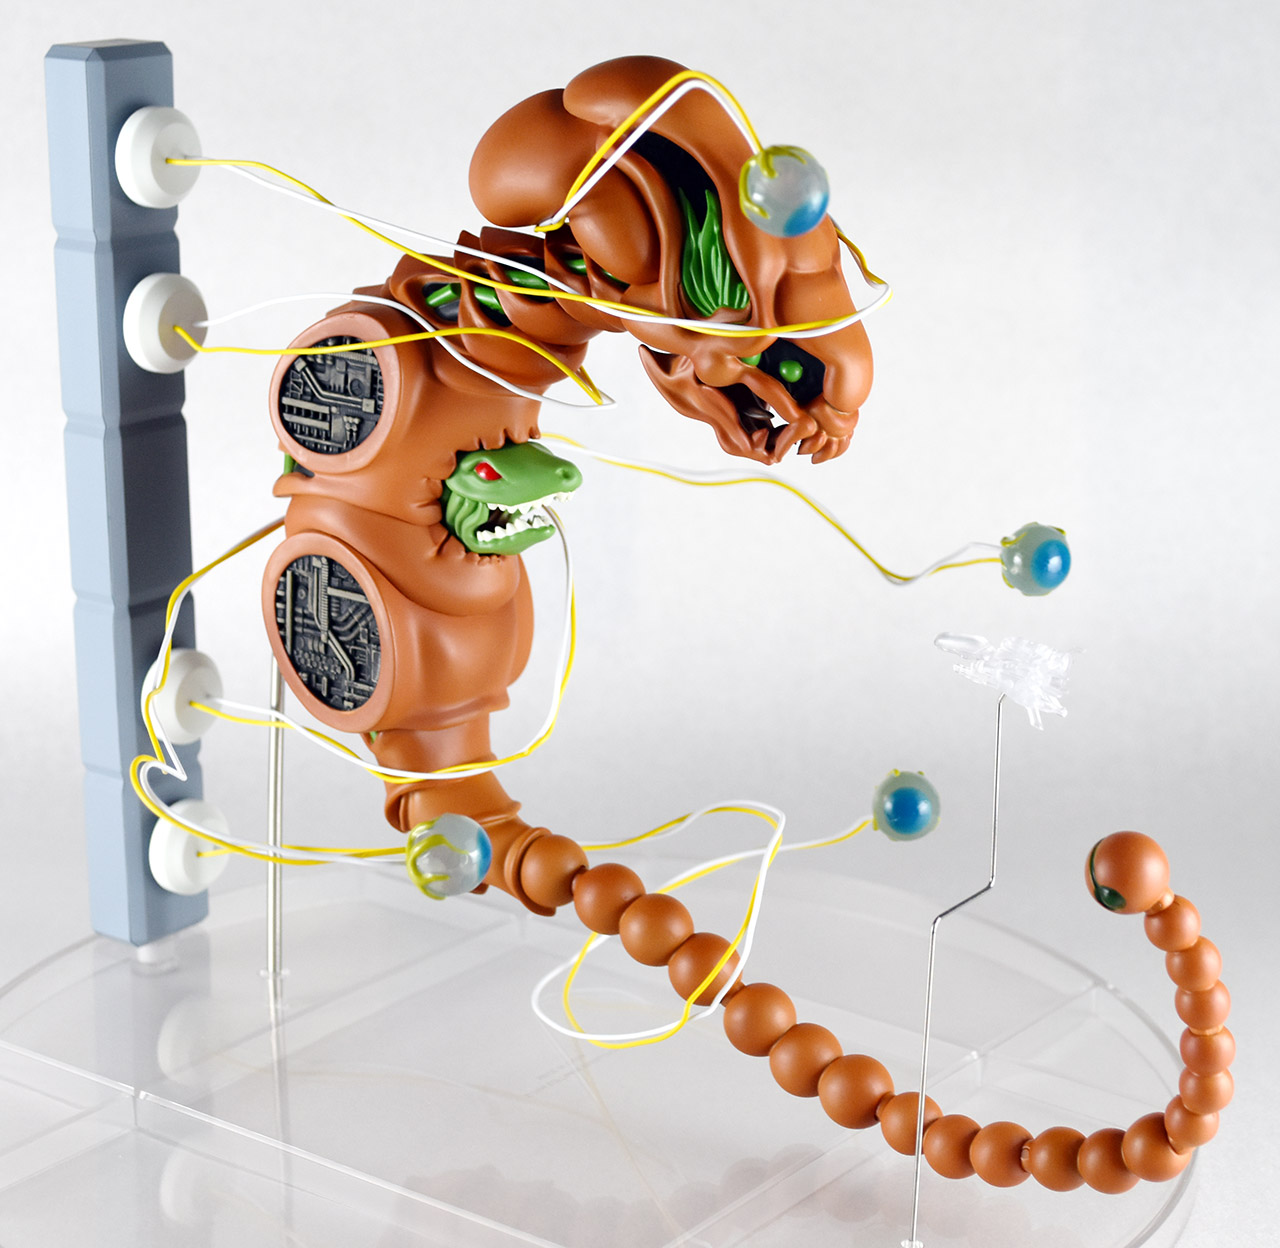 Details about   FREEing R-Type Dobkeratops Figma Action Figure Multi-Color 